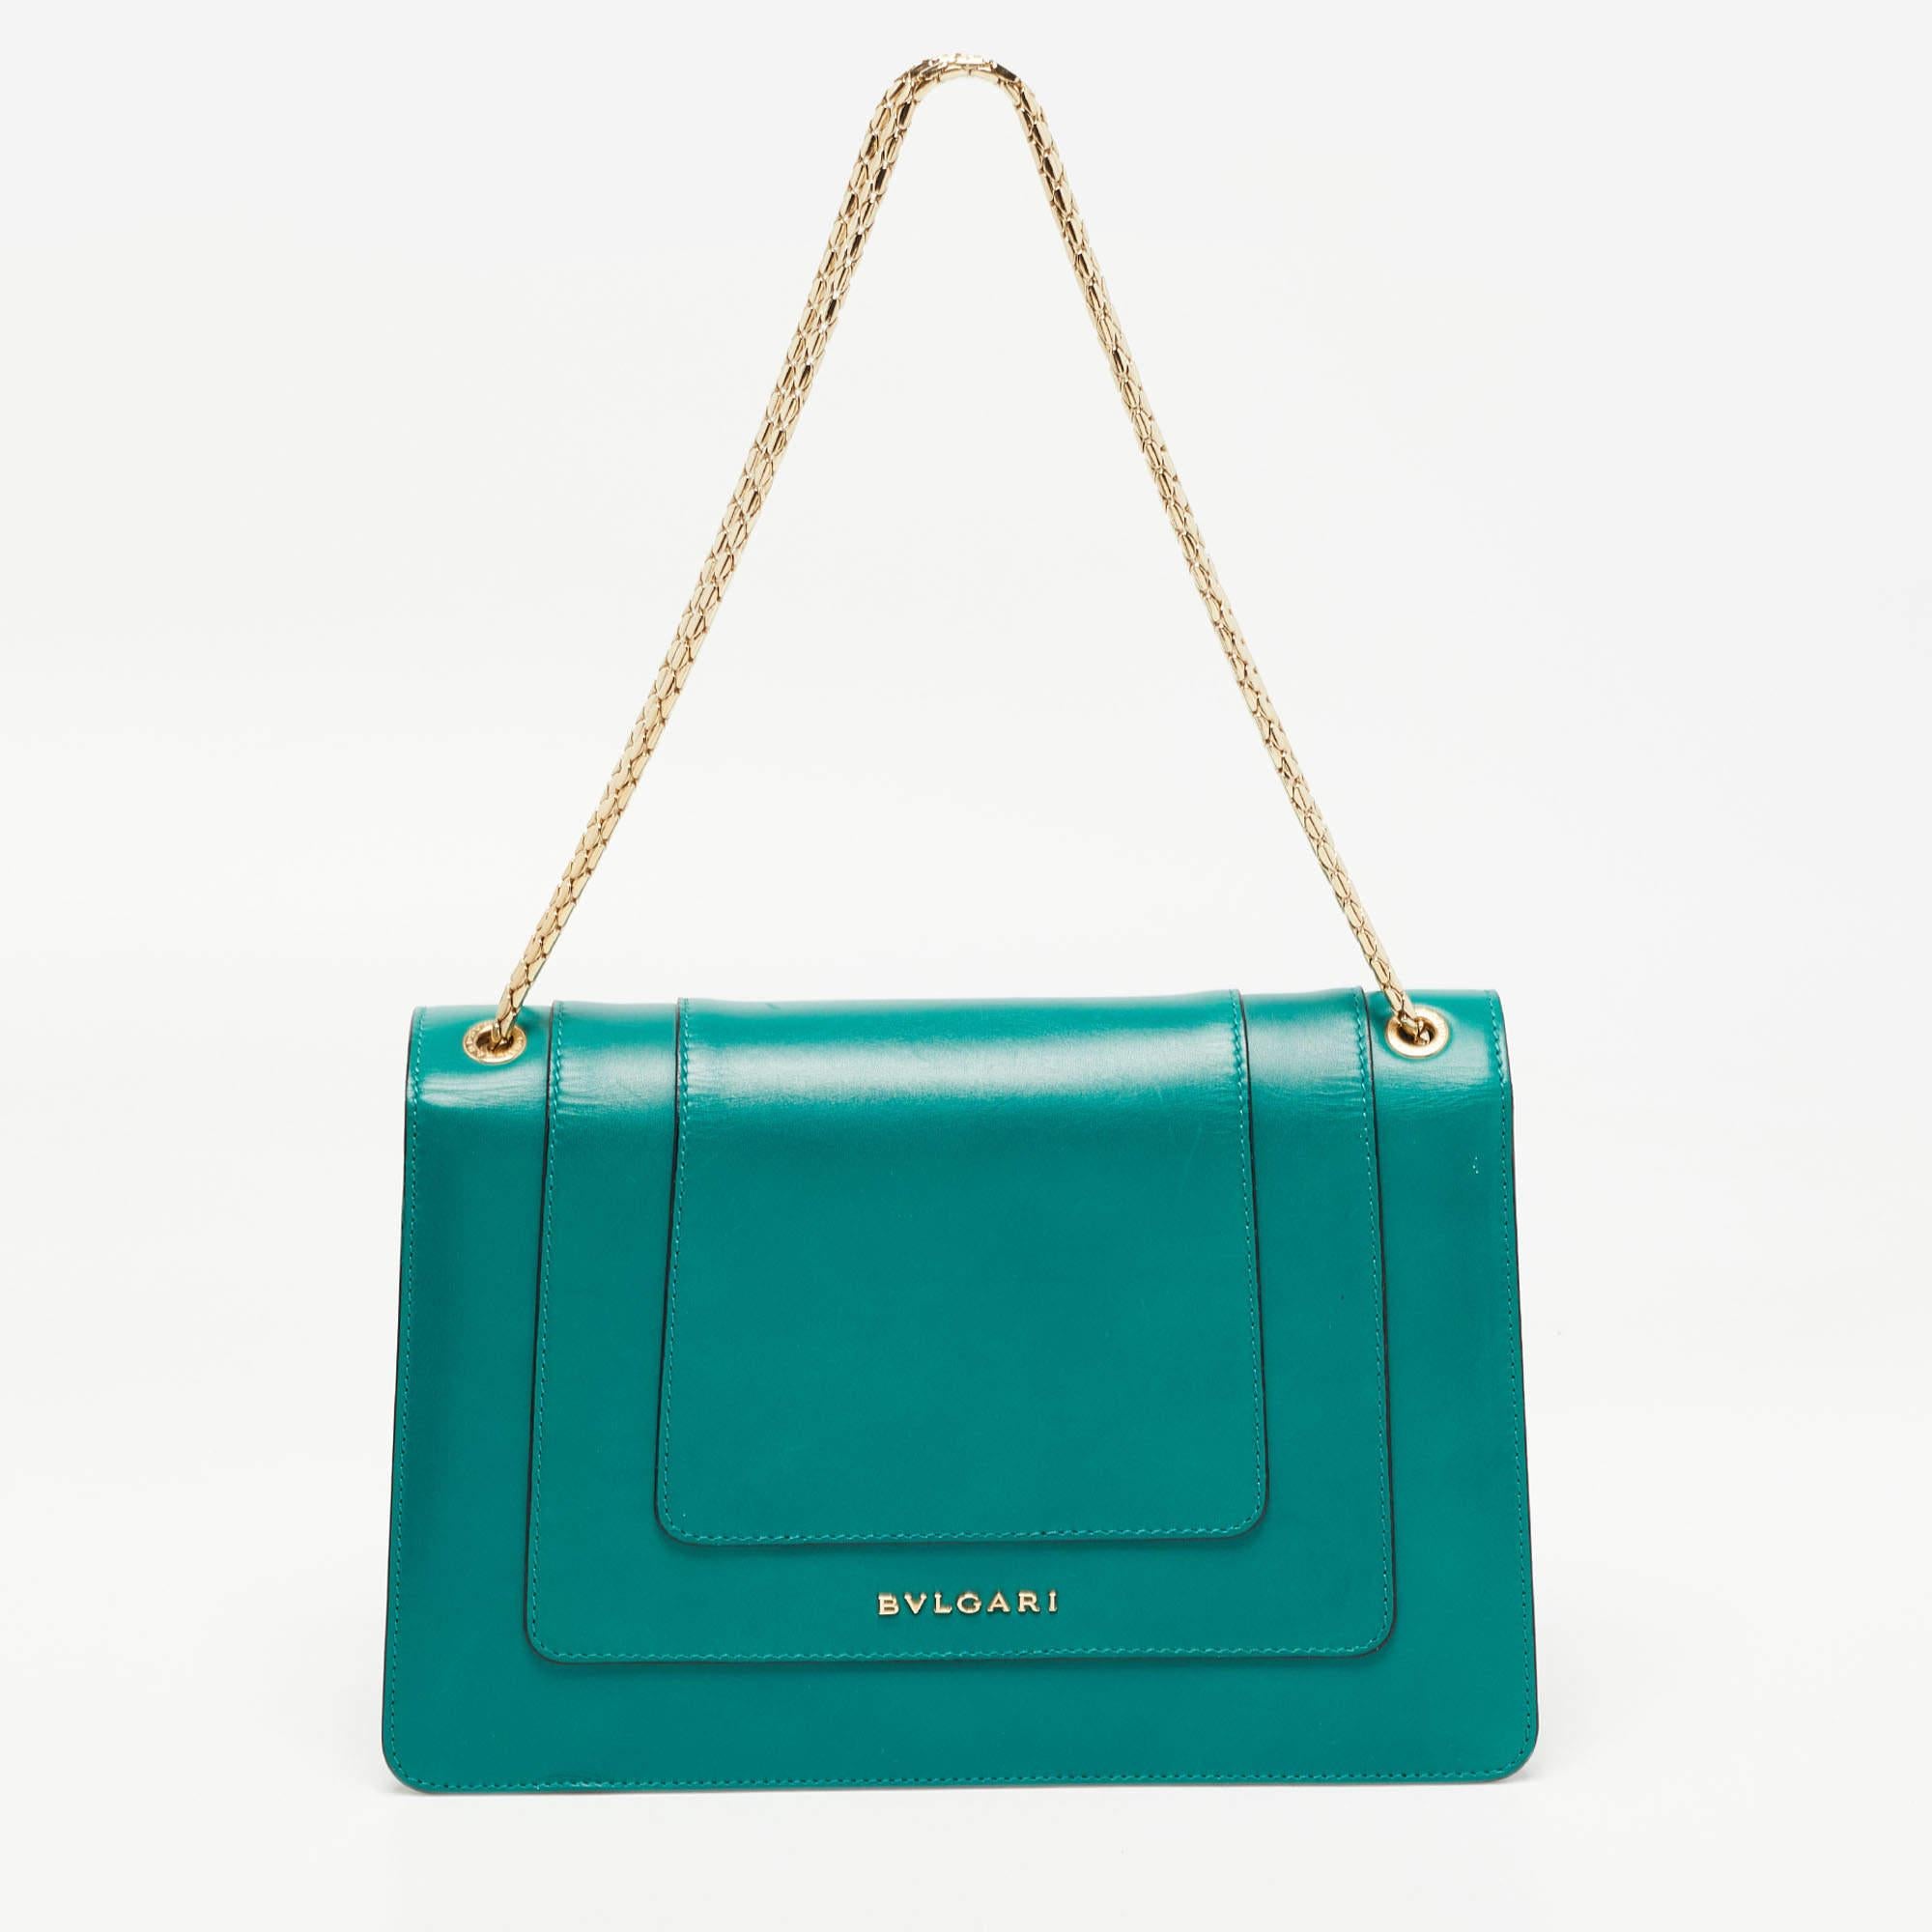 The fashion house’s tradition of excellence, coupled with modern design sensibilities, works to make this Bvlgari Serpenti Forever bag one of a kind. It's a fabulous accessory for everyday use.

Includes: Original Dustbag, Pocket Mirror, Rain Cover
